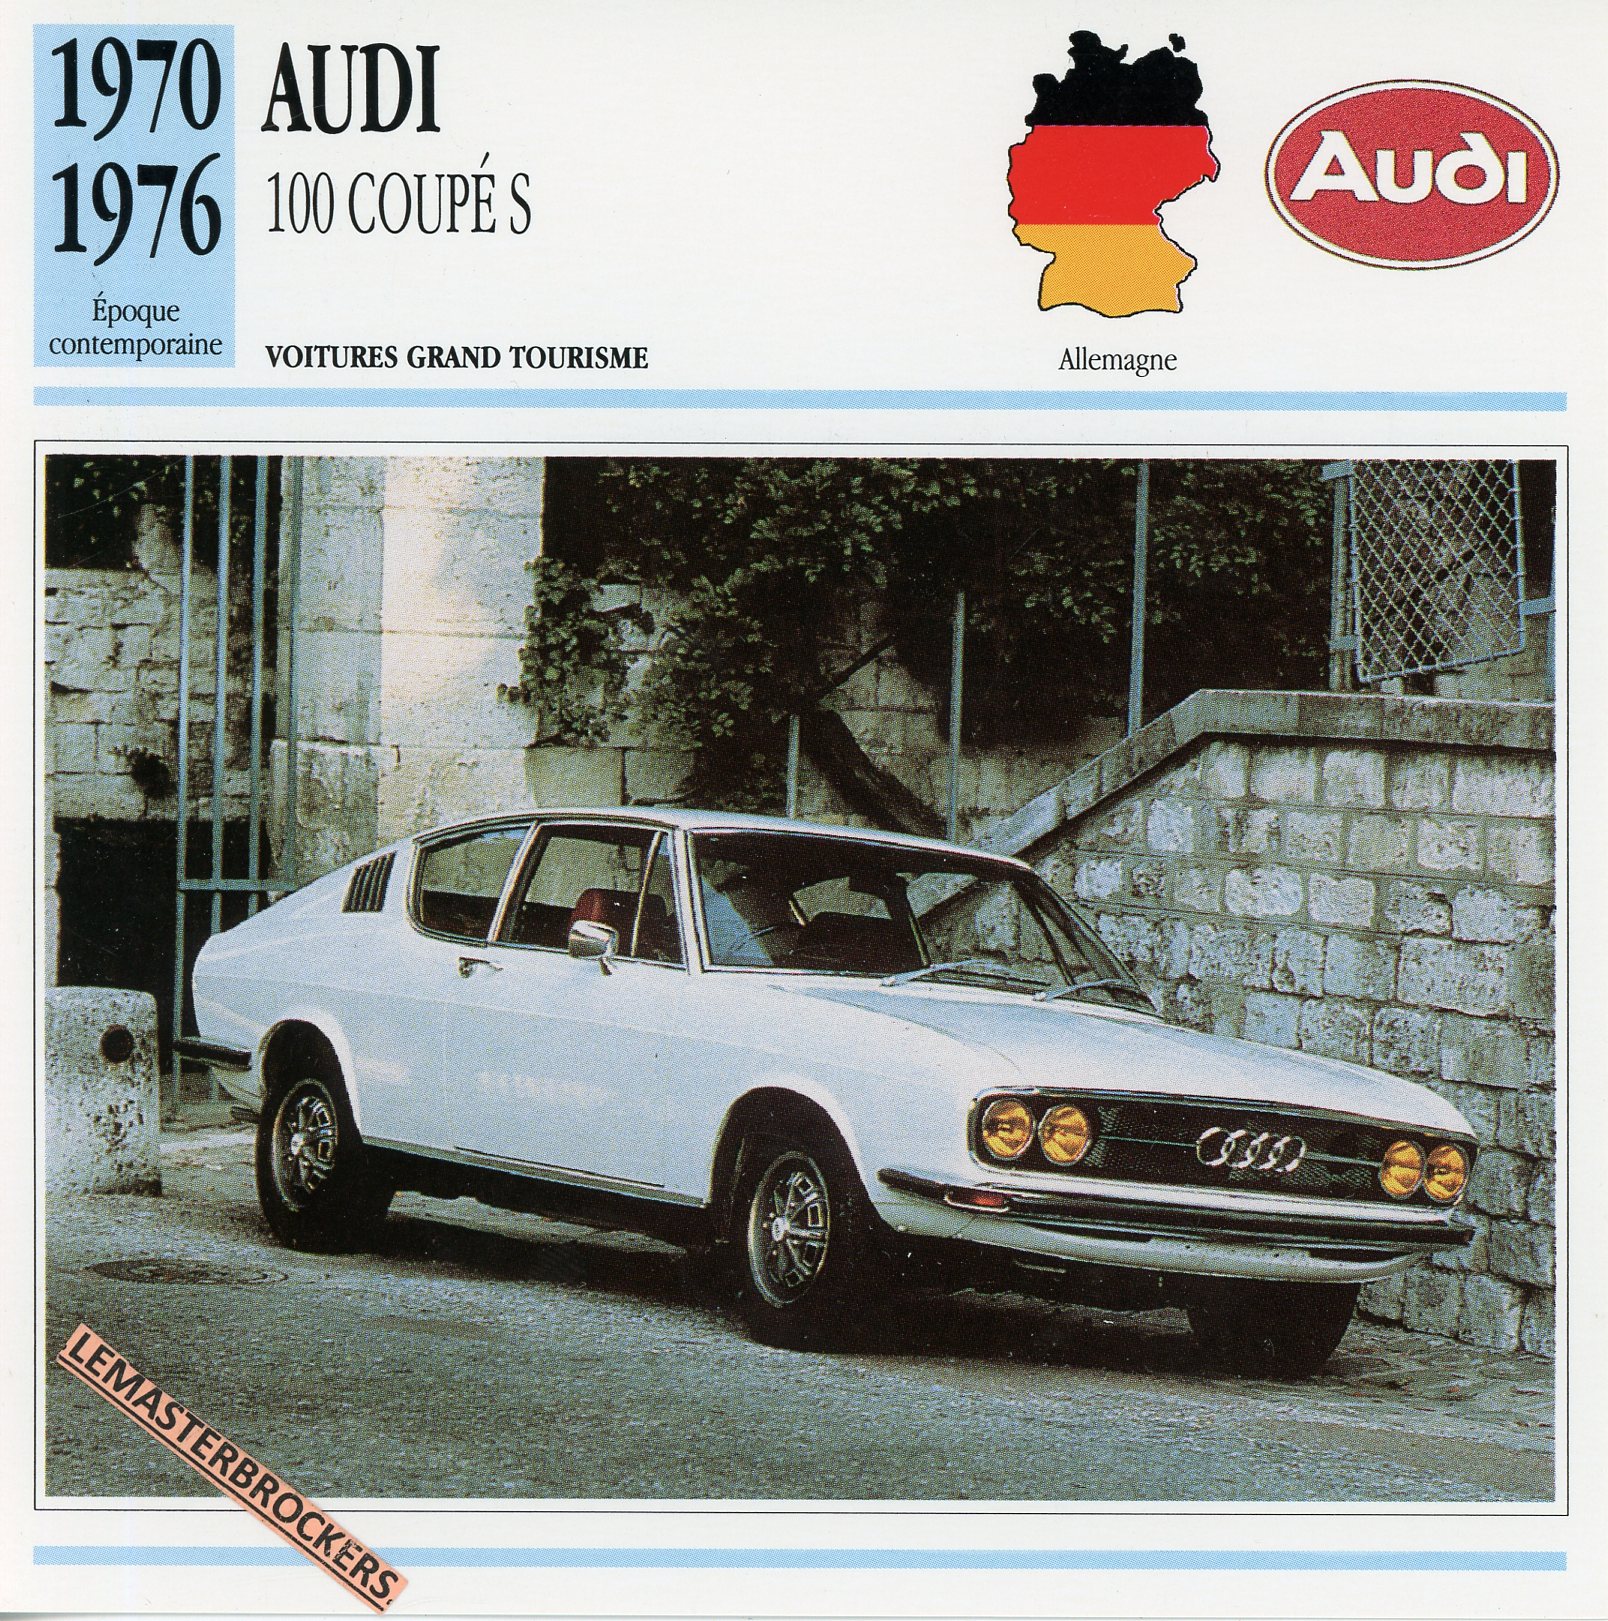 FICHE-AUDI-100S-COUPE-100-S-1970-1976-LEMASTERBROCKERS-FICHE-AUTO-CARS-CARD-ATLAS-FRENCH